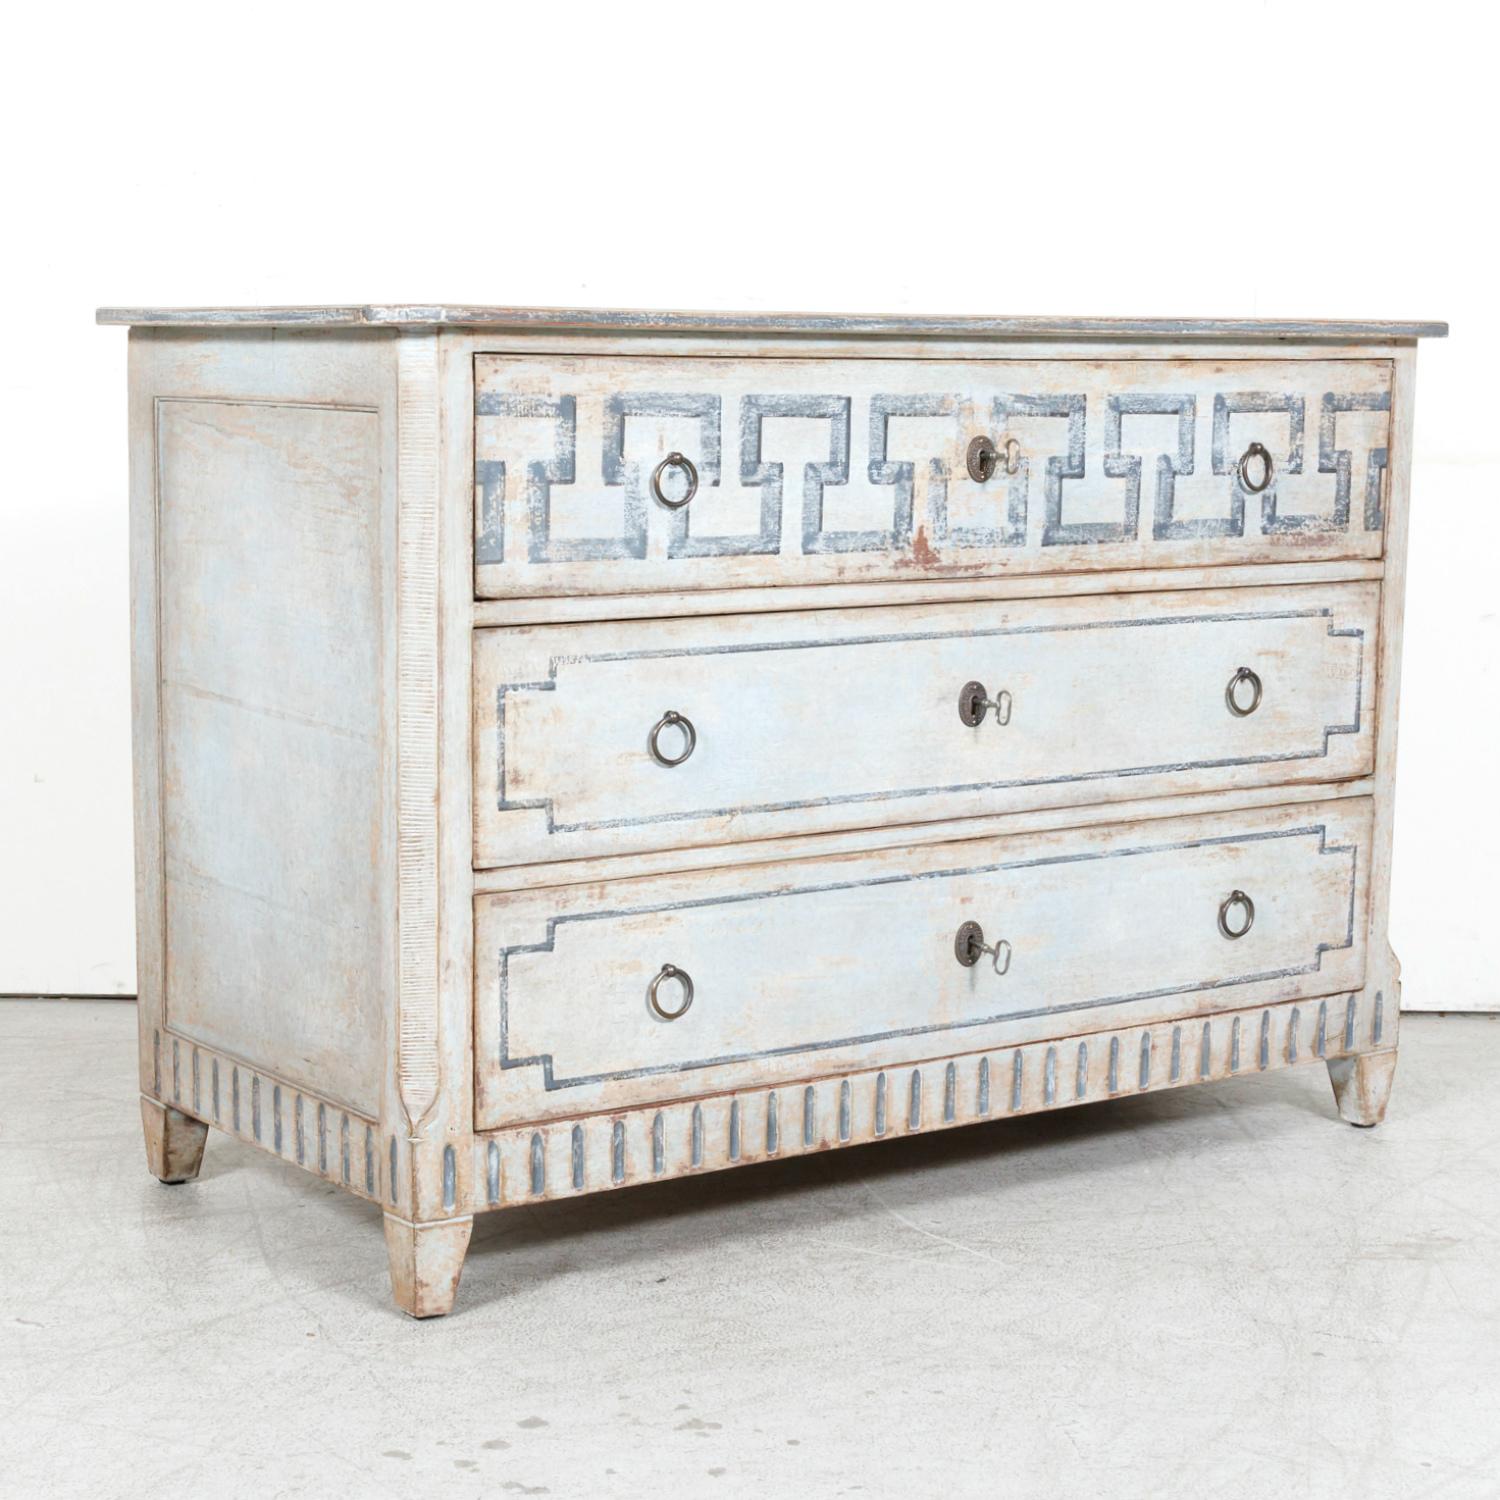 A handsome 19th century French Louis XVI style painted three-drawer commode handcrafted in the South of France near Avignon, circa 1890s. Having a beautifully distressed bluish-gray painted finish, this handsome French chest of drawers features a